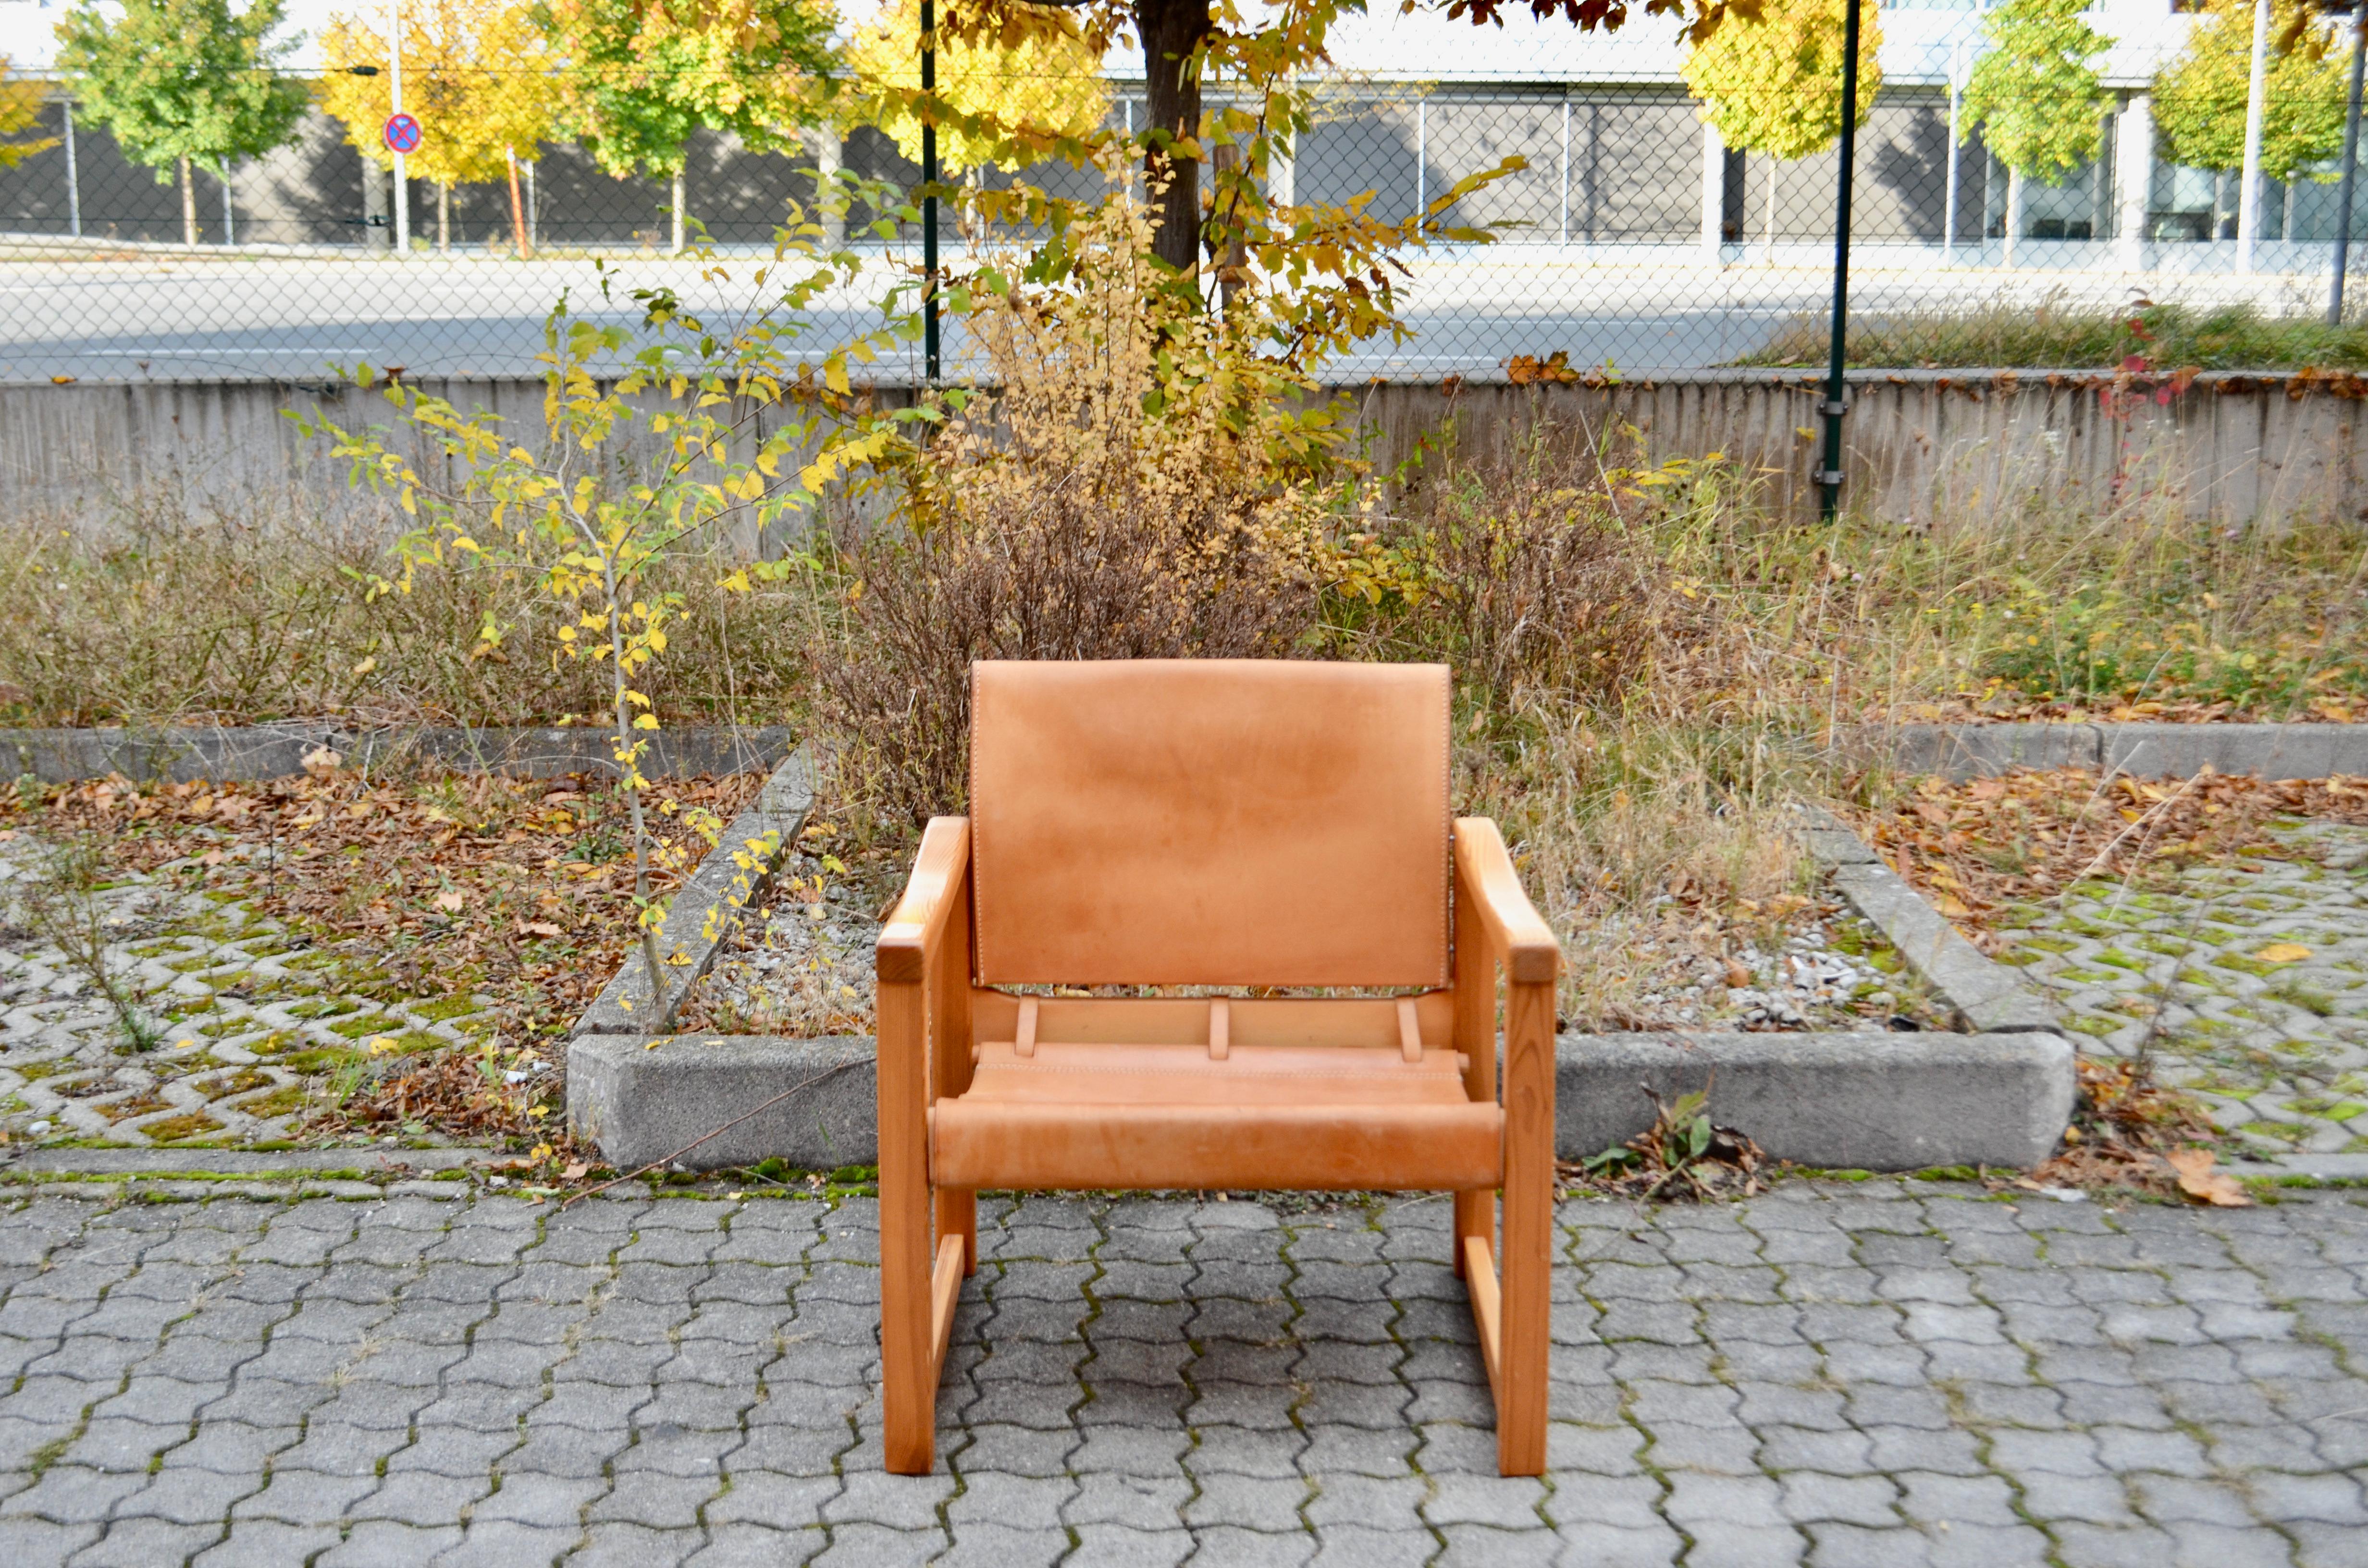 This Ikea Classic Vintage Lounge chair was designed 1972 by Karin Mobring.
It has a solid frame made of scandinavian pine.
The armrests has a great shape which comforts the arm well.
The leather is a thick vegetal saddle leather which gets much